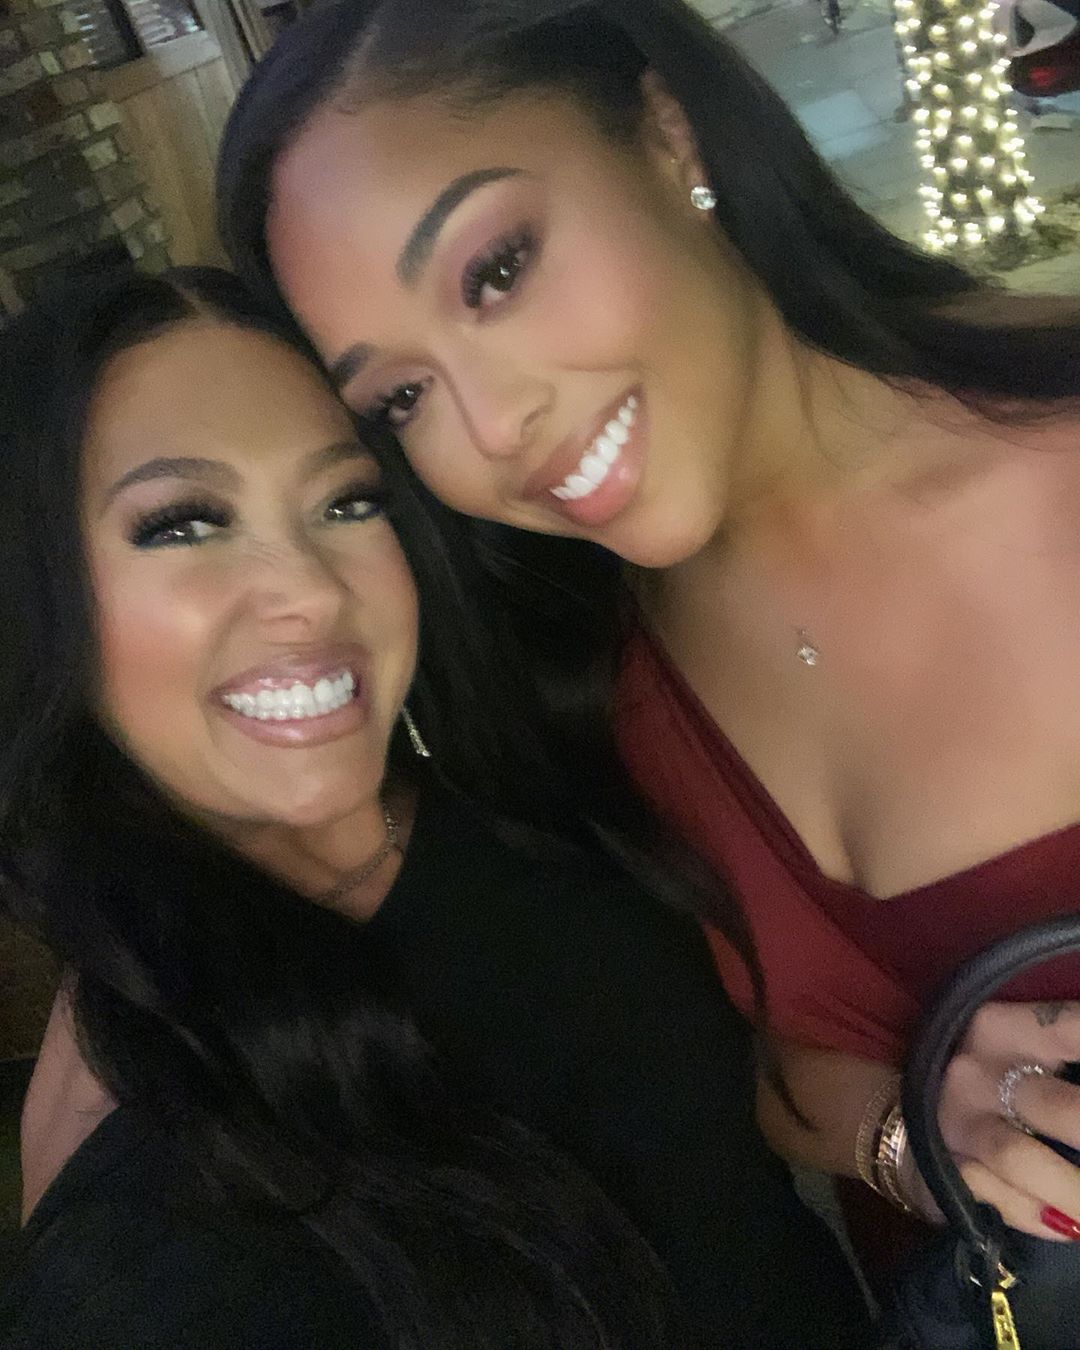 Jordyn Woods' Mom BLASTS Anyone 'Trying To Benefit' From Her